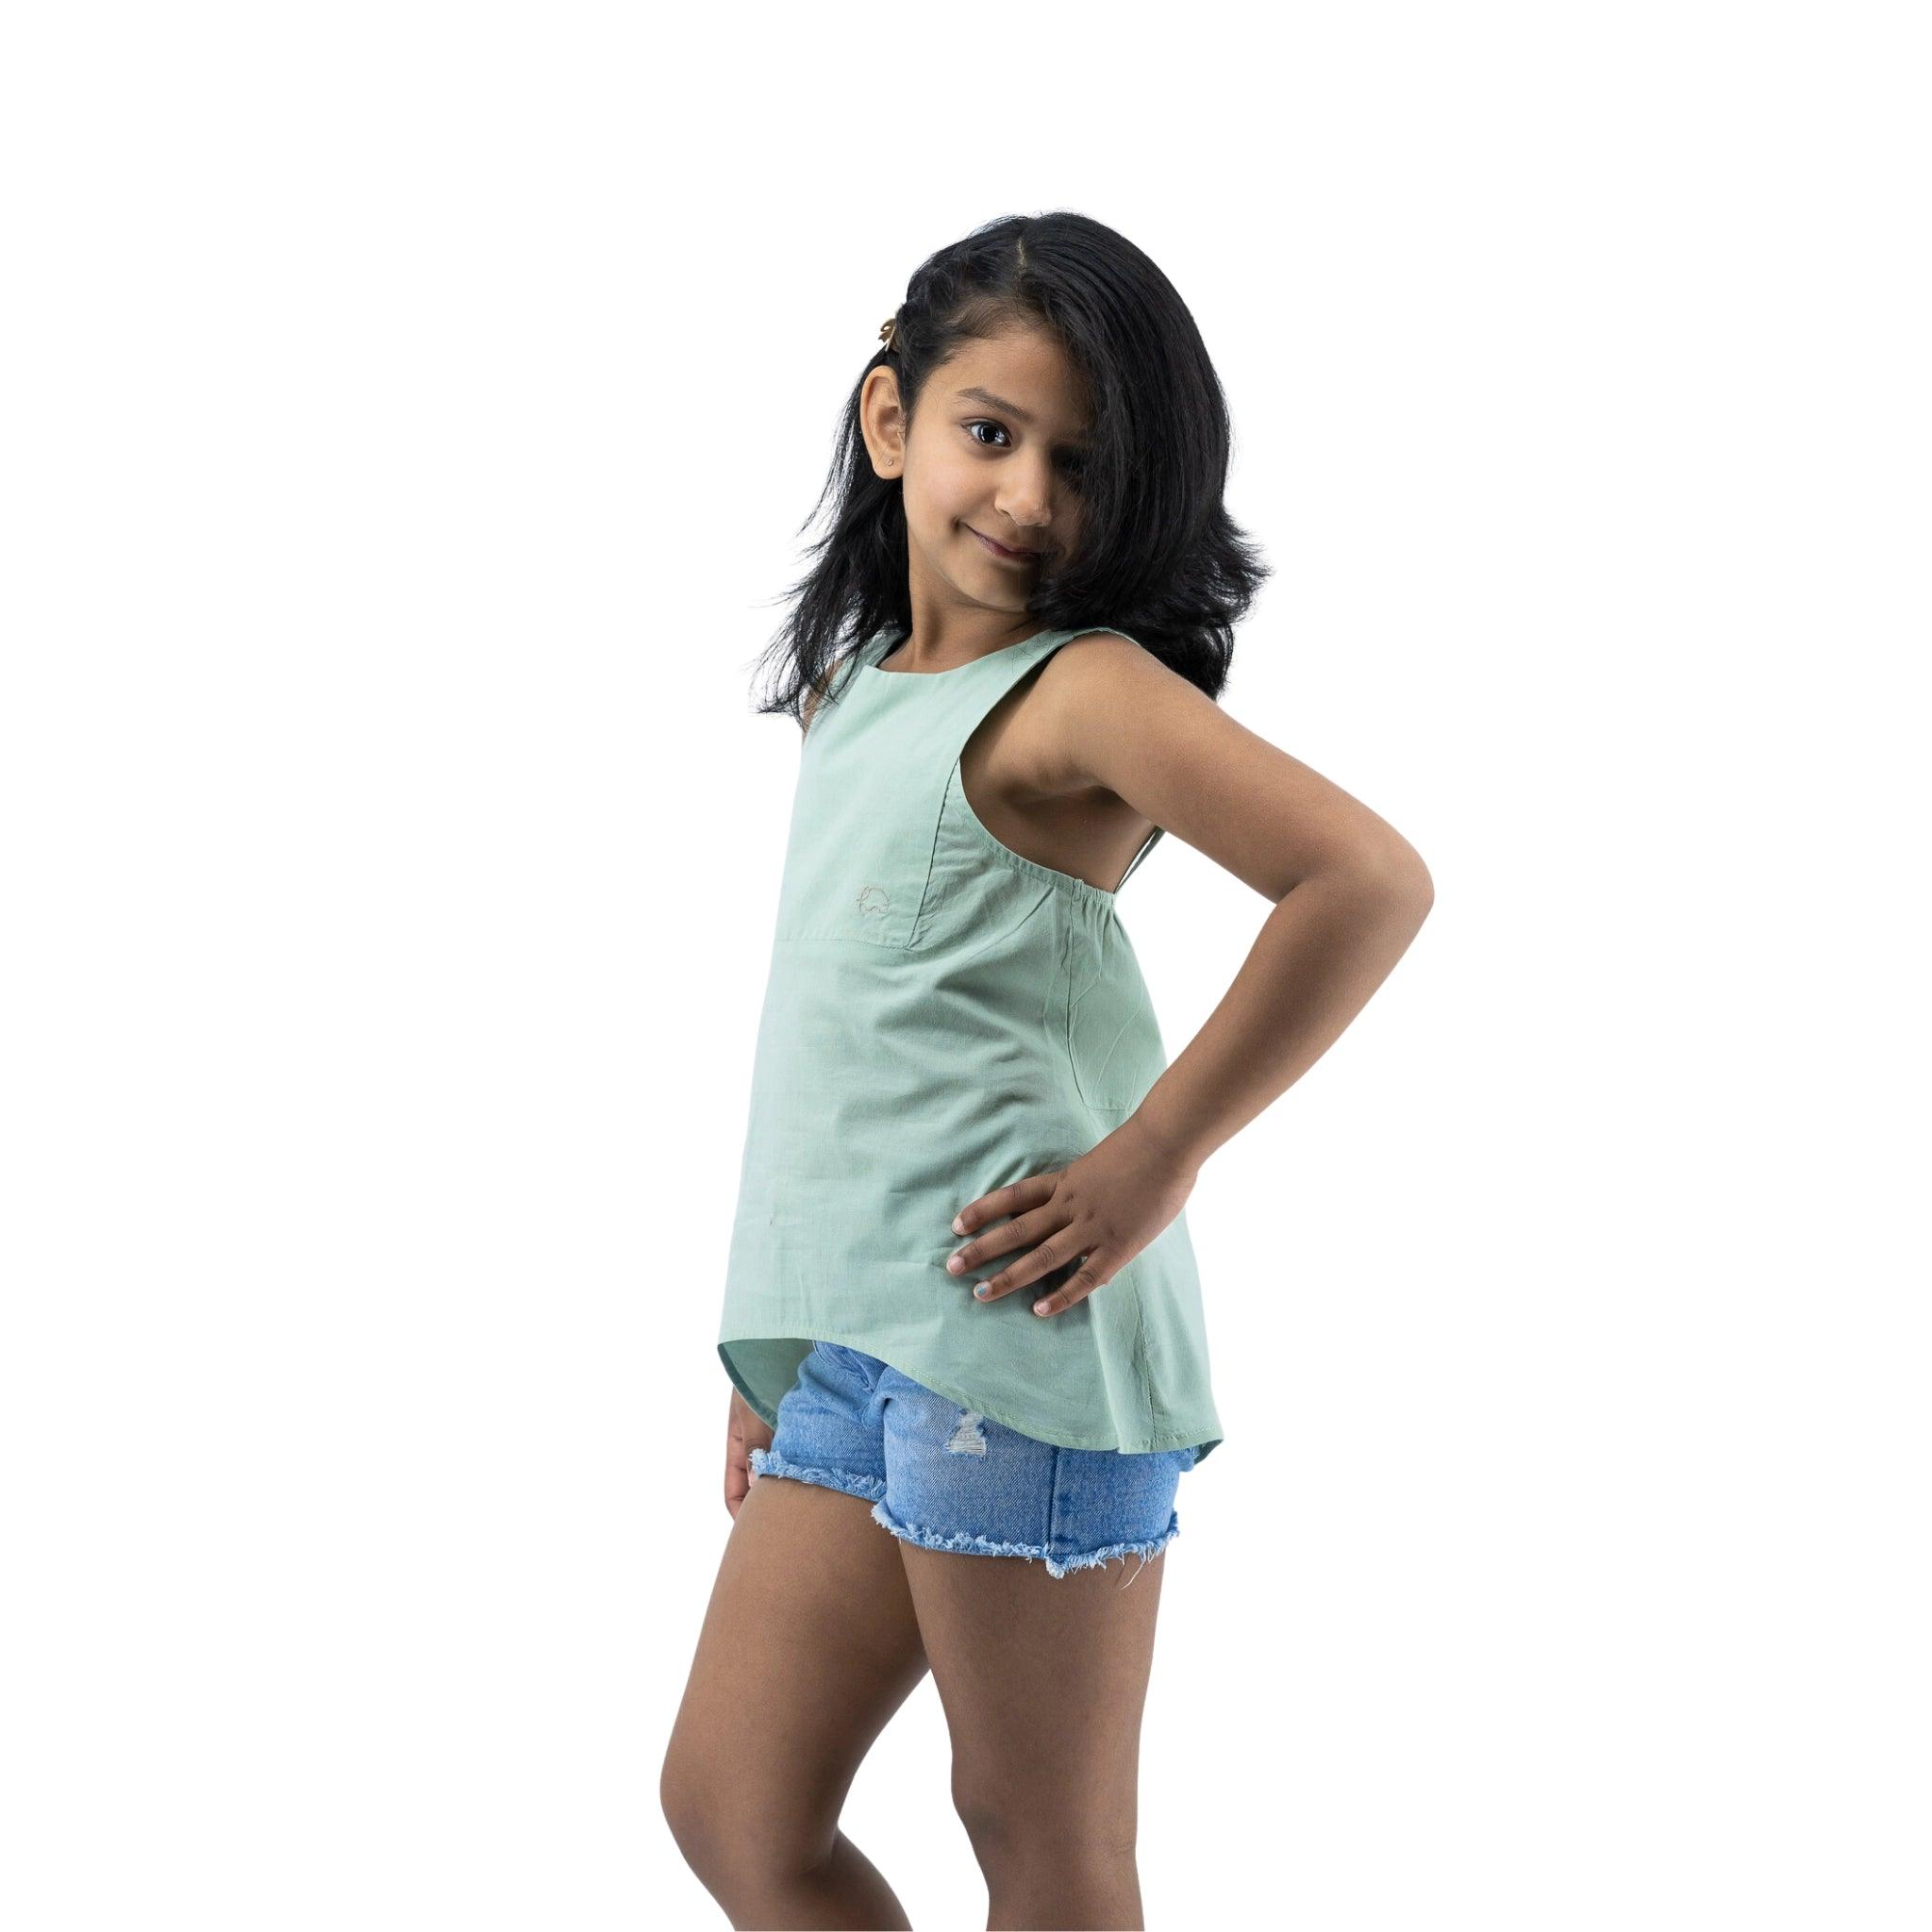 A young girl in a Karee Smoke Green Cotton Bib Neck Top and denim shorts stands smiling with her hands on her hips, isolated on a white background.